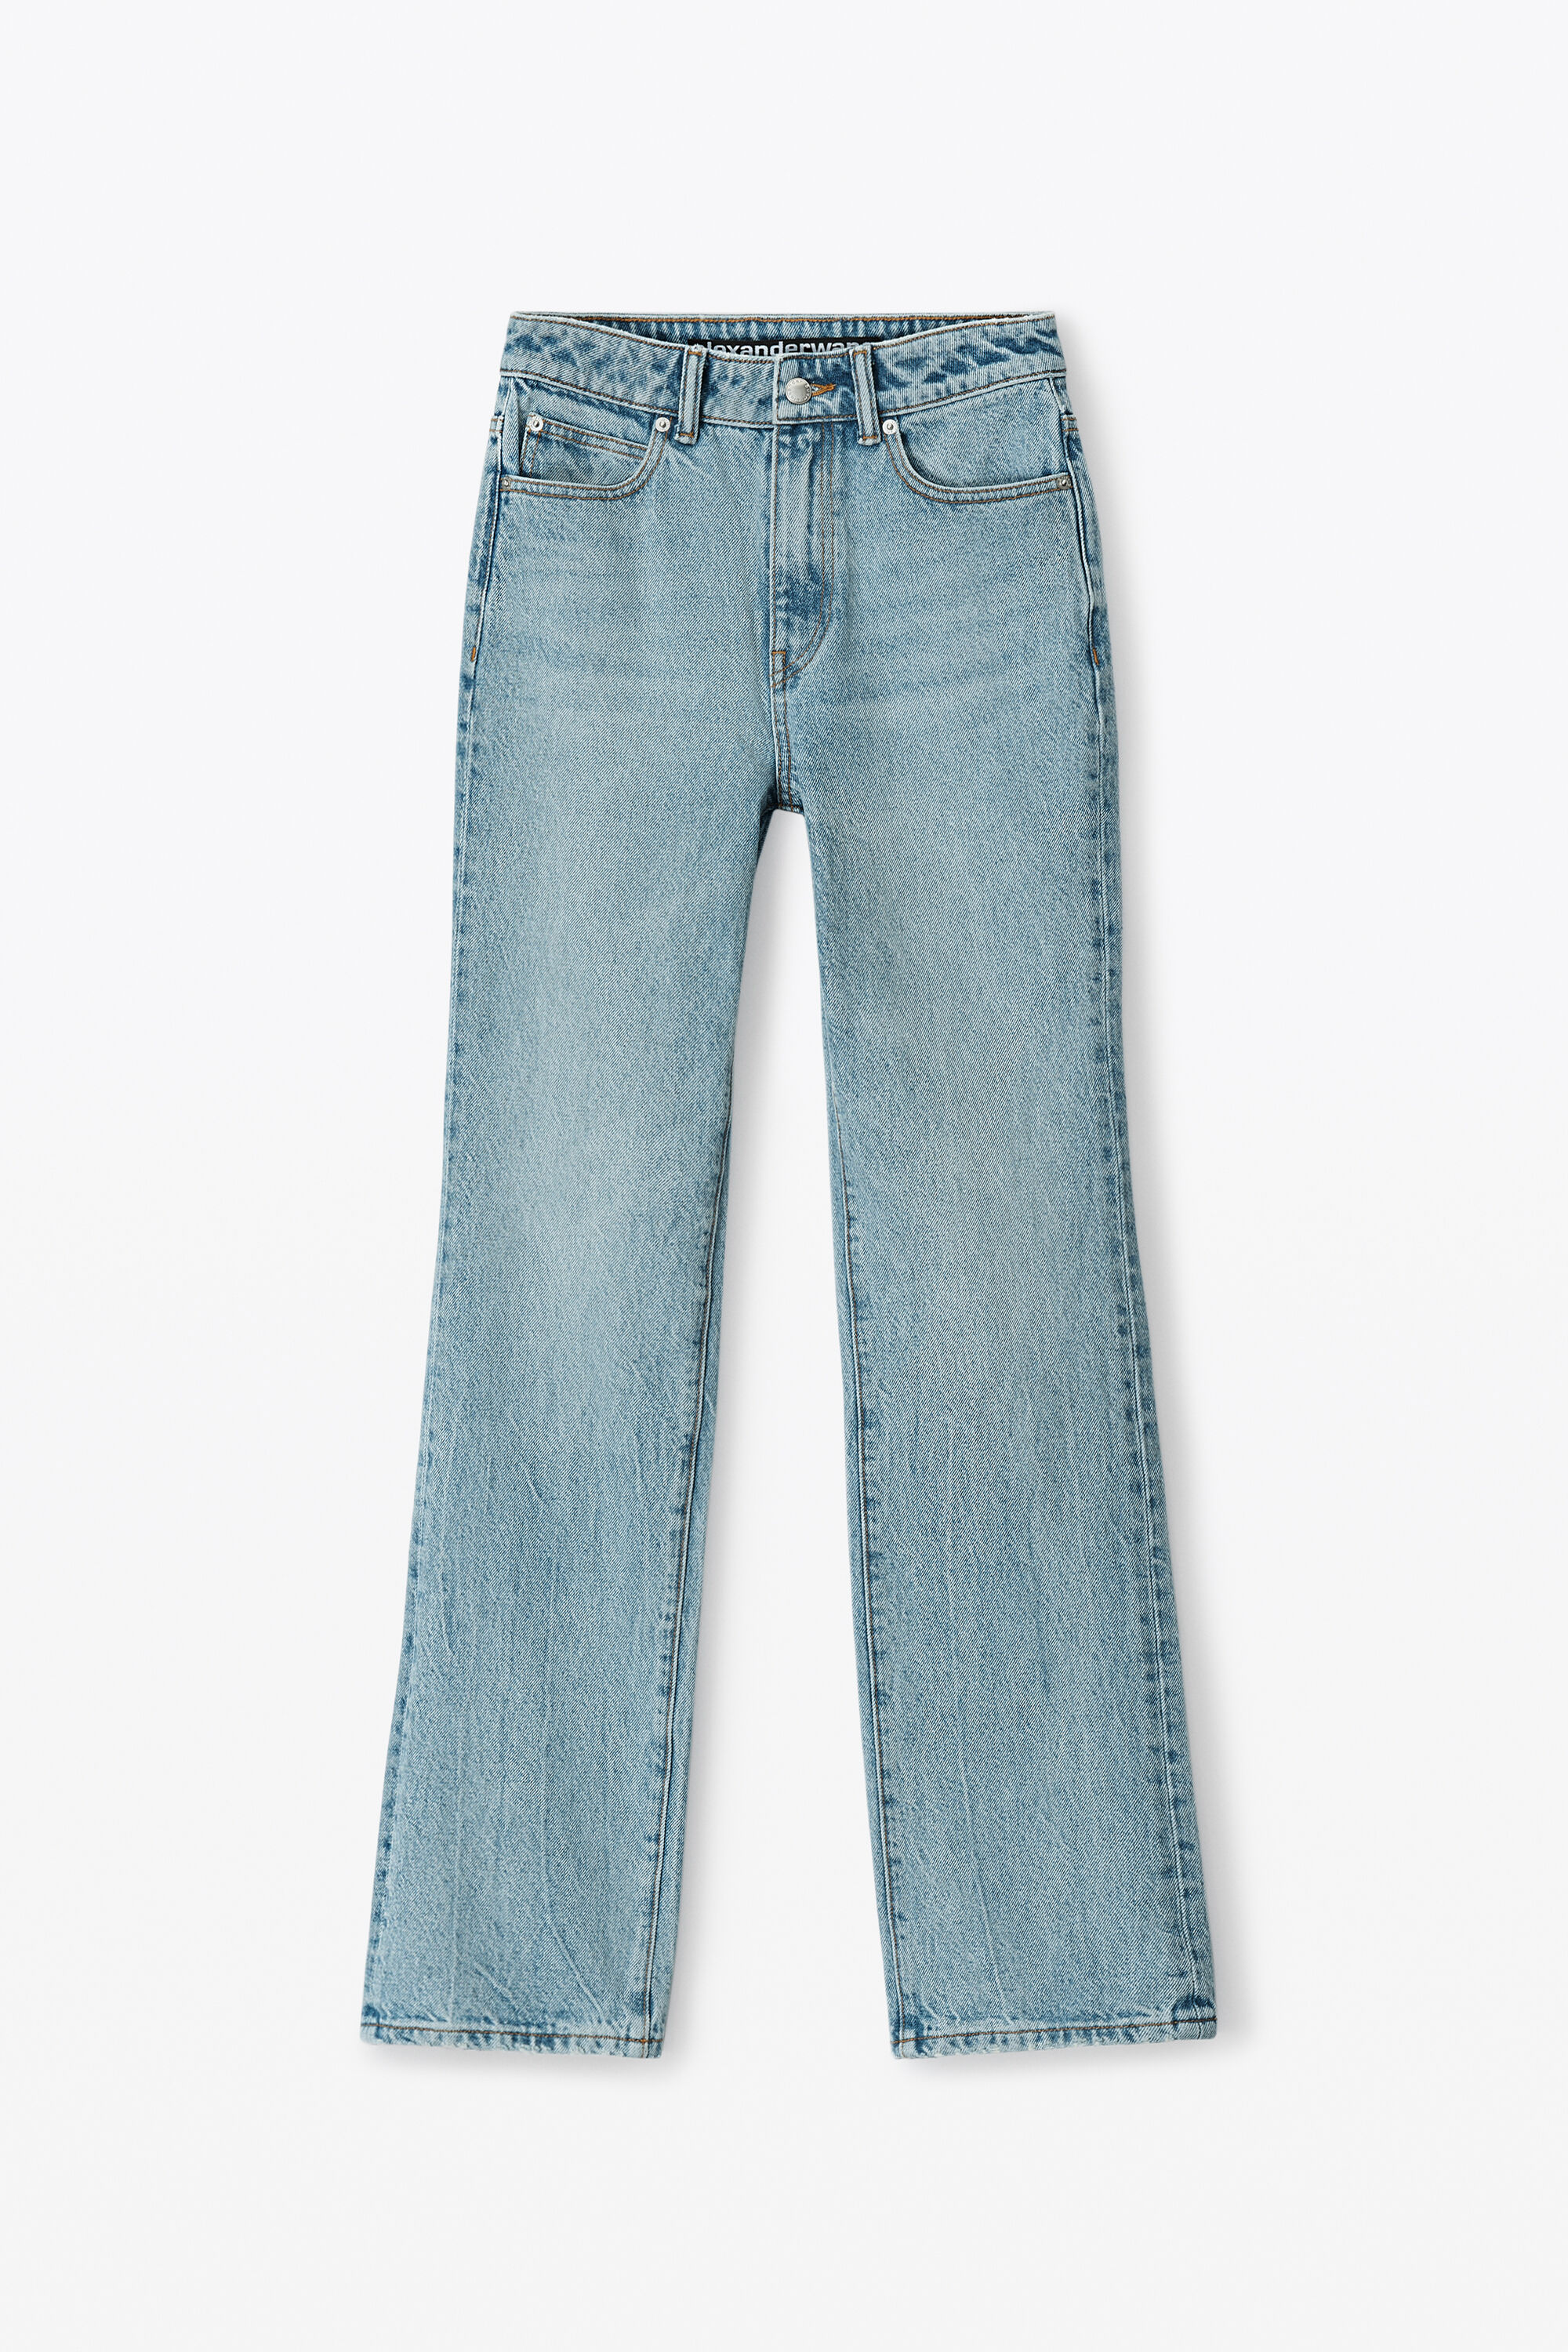 FLY HIGH-RISE STACKED JEAN IN DENIM in LIGHT INDIGO FADE 